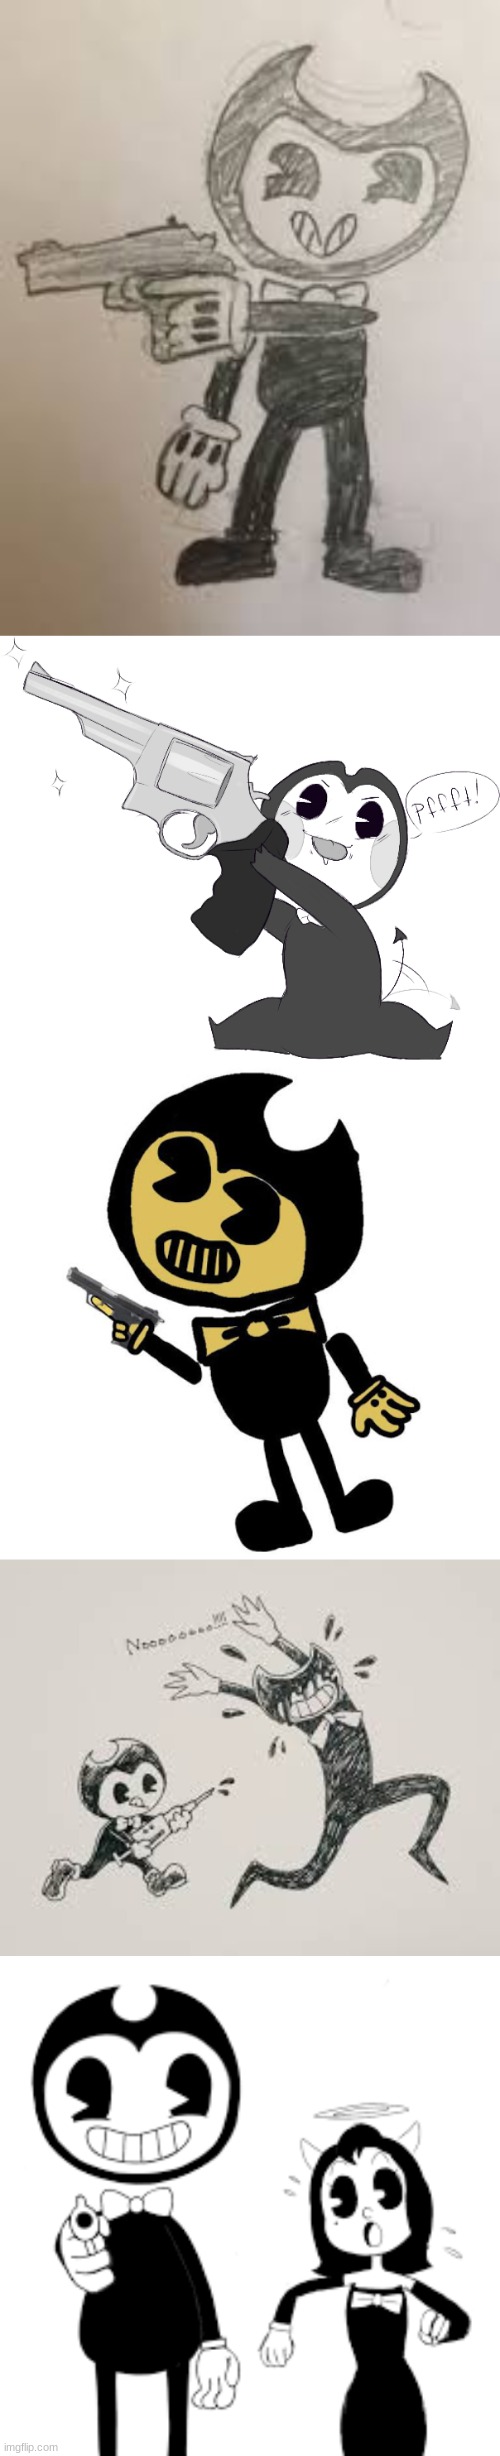 Bendy With A Gun | image tagged in bendy and the ink machine,bendy,ink bendy,gun | made w/ Imgflip meme maker